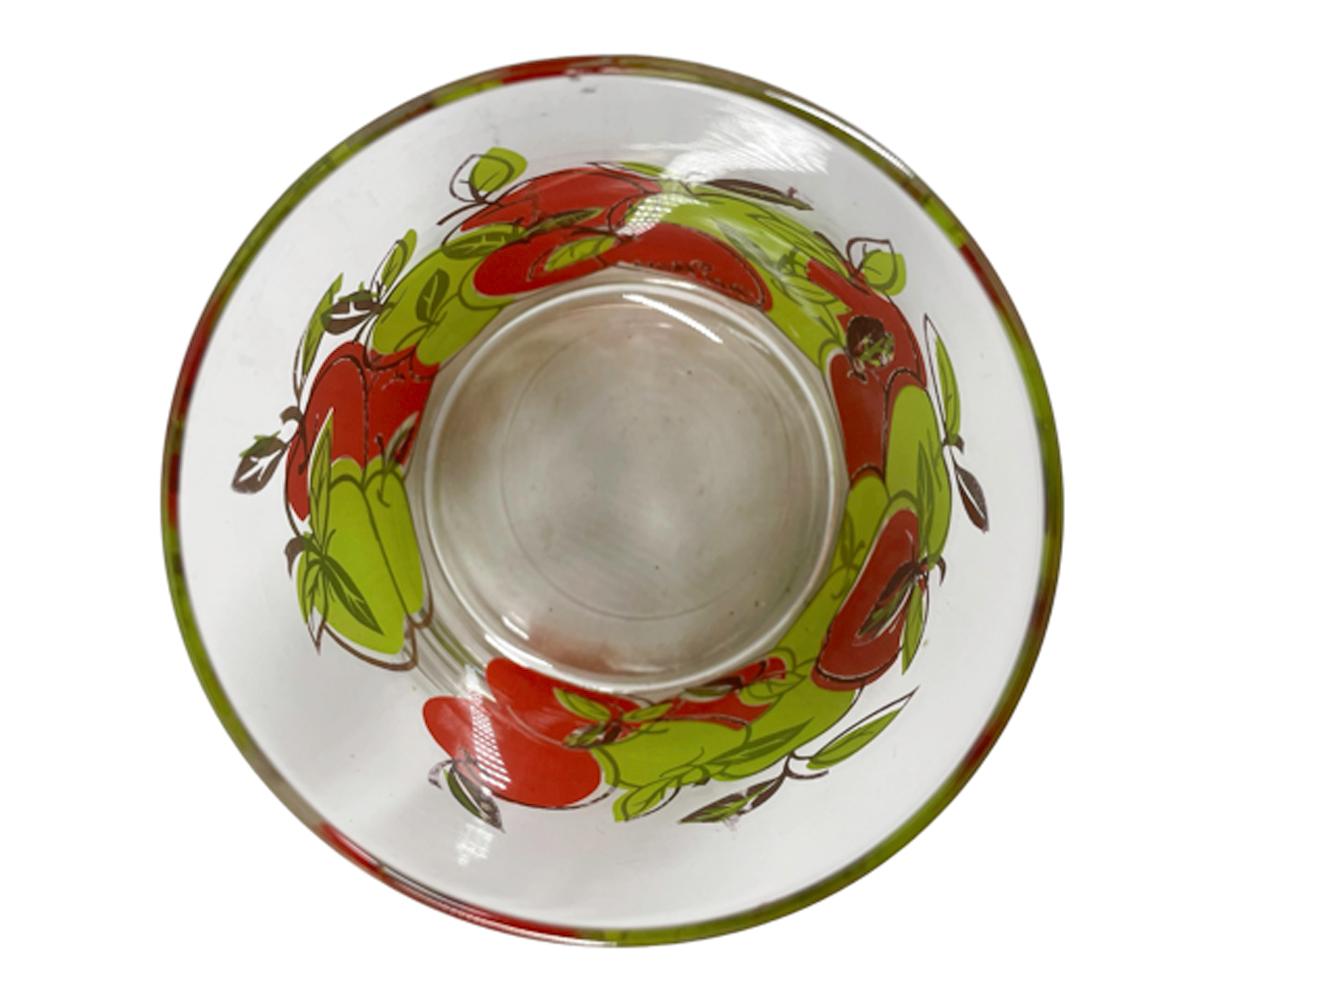 Set of 4 mid-century modern rocks glasses designed by Fred Press with red and green apples accented with 22 karat gold.